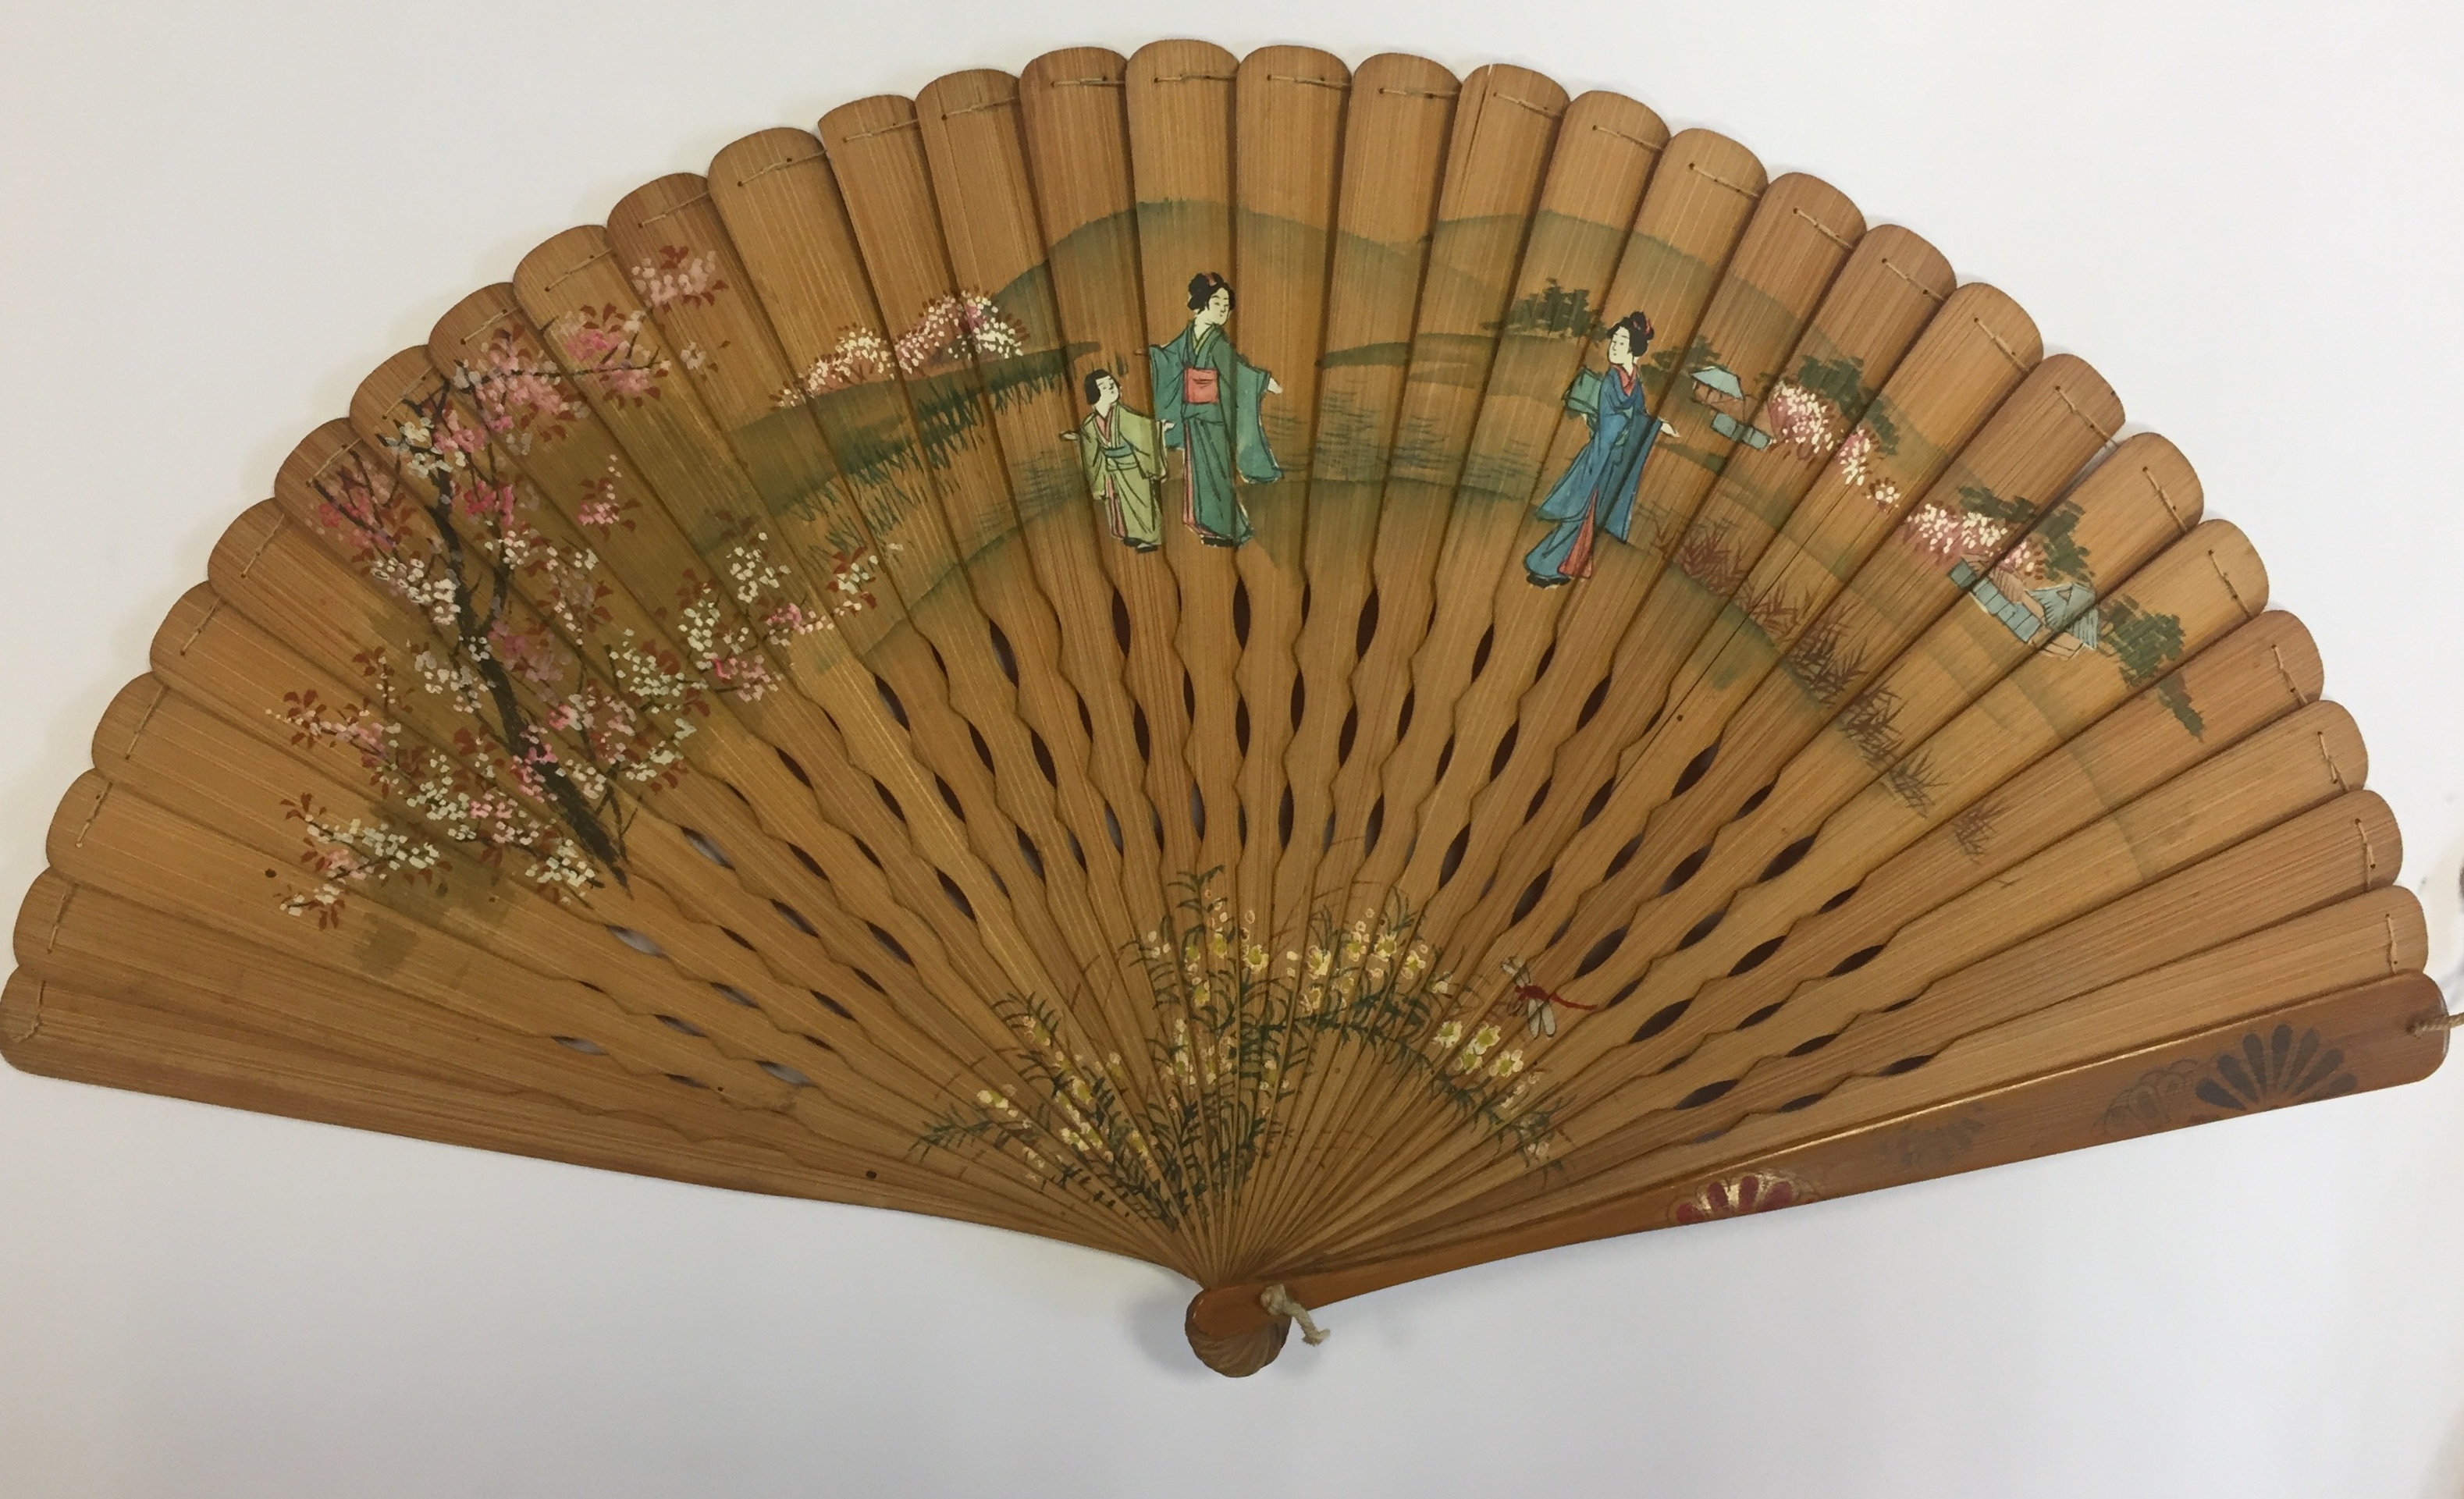 THEATRE: A wooden handheld fan featuring a painted decoration of several Japanese ladies in - Image 2 of 2